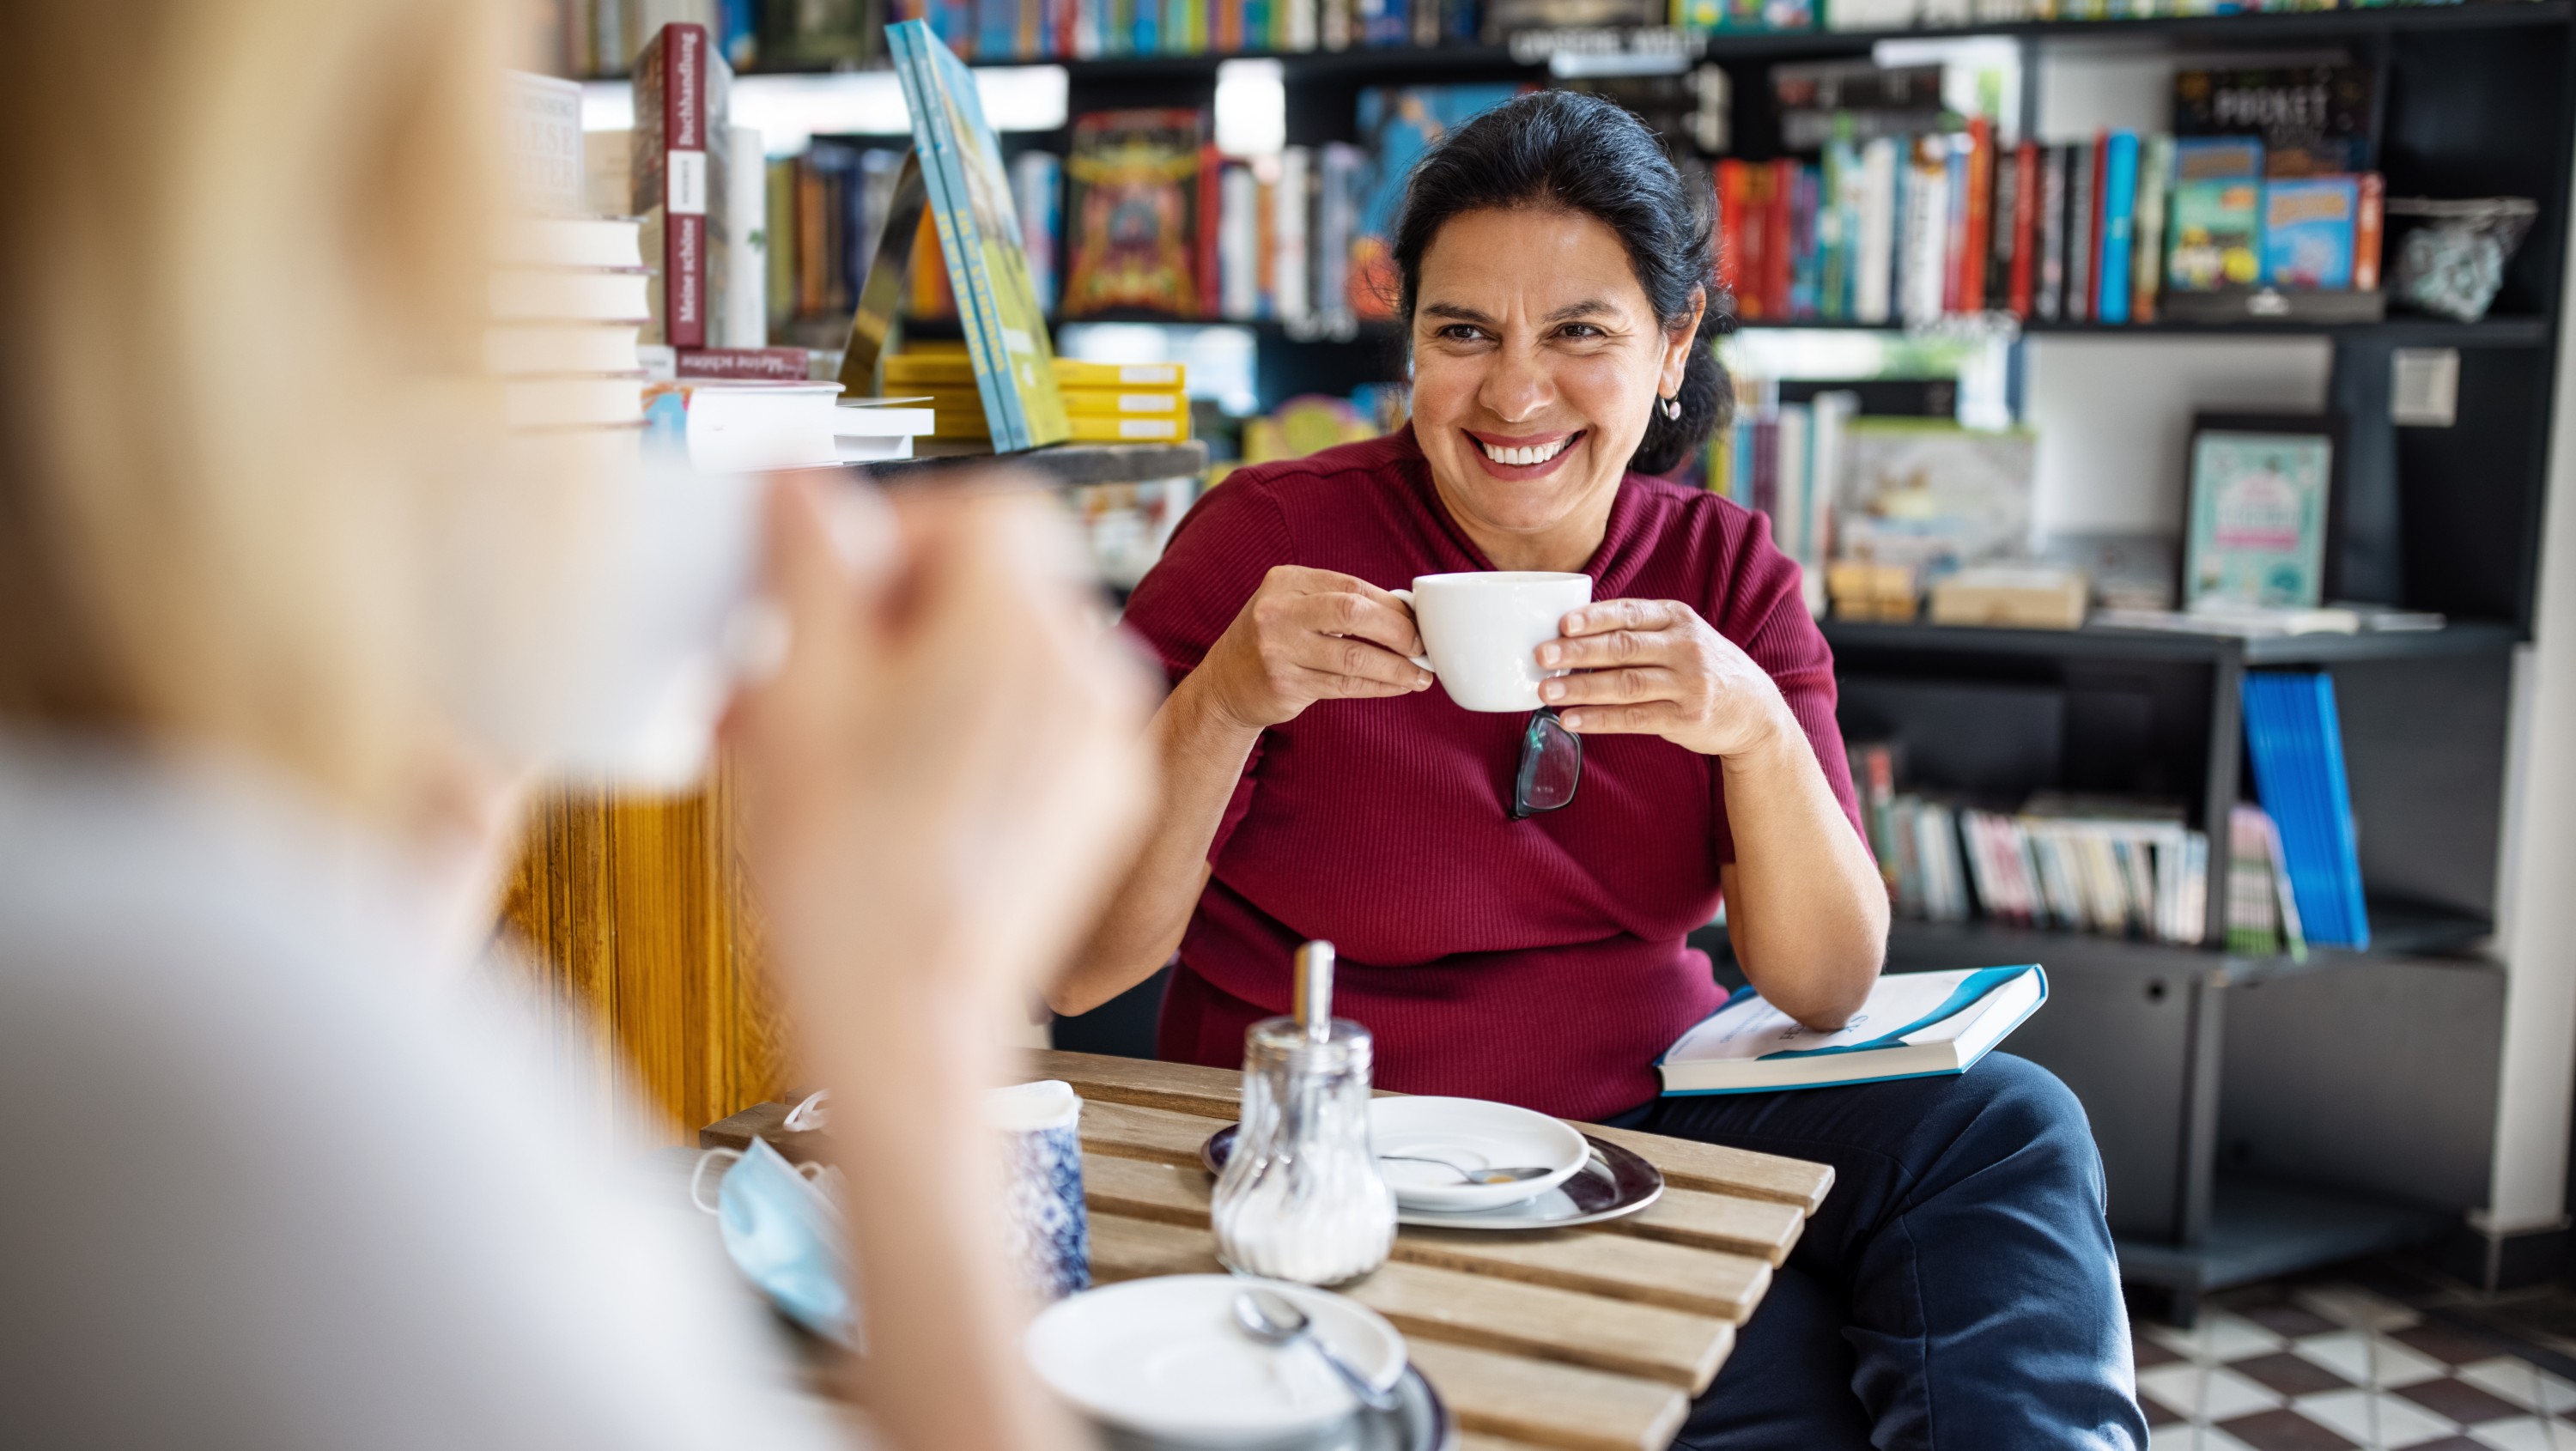 Woman drinks coffee in bookstore cafe. (Photo: Getty Images)